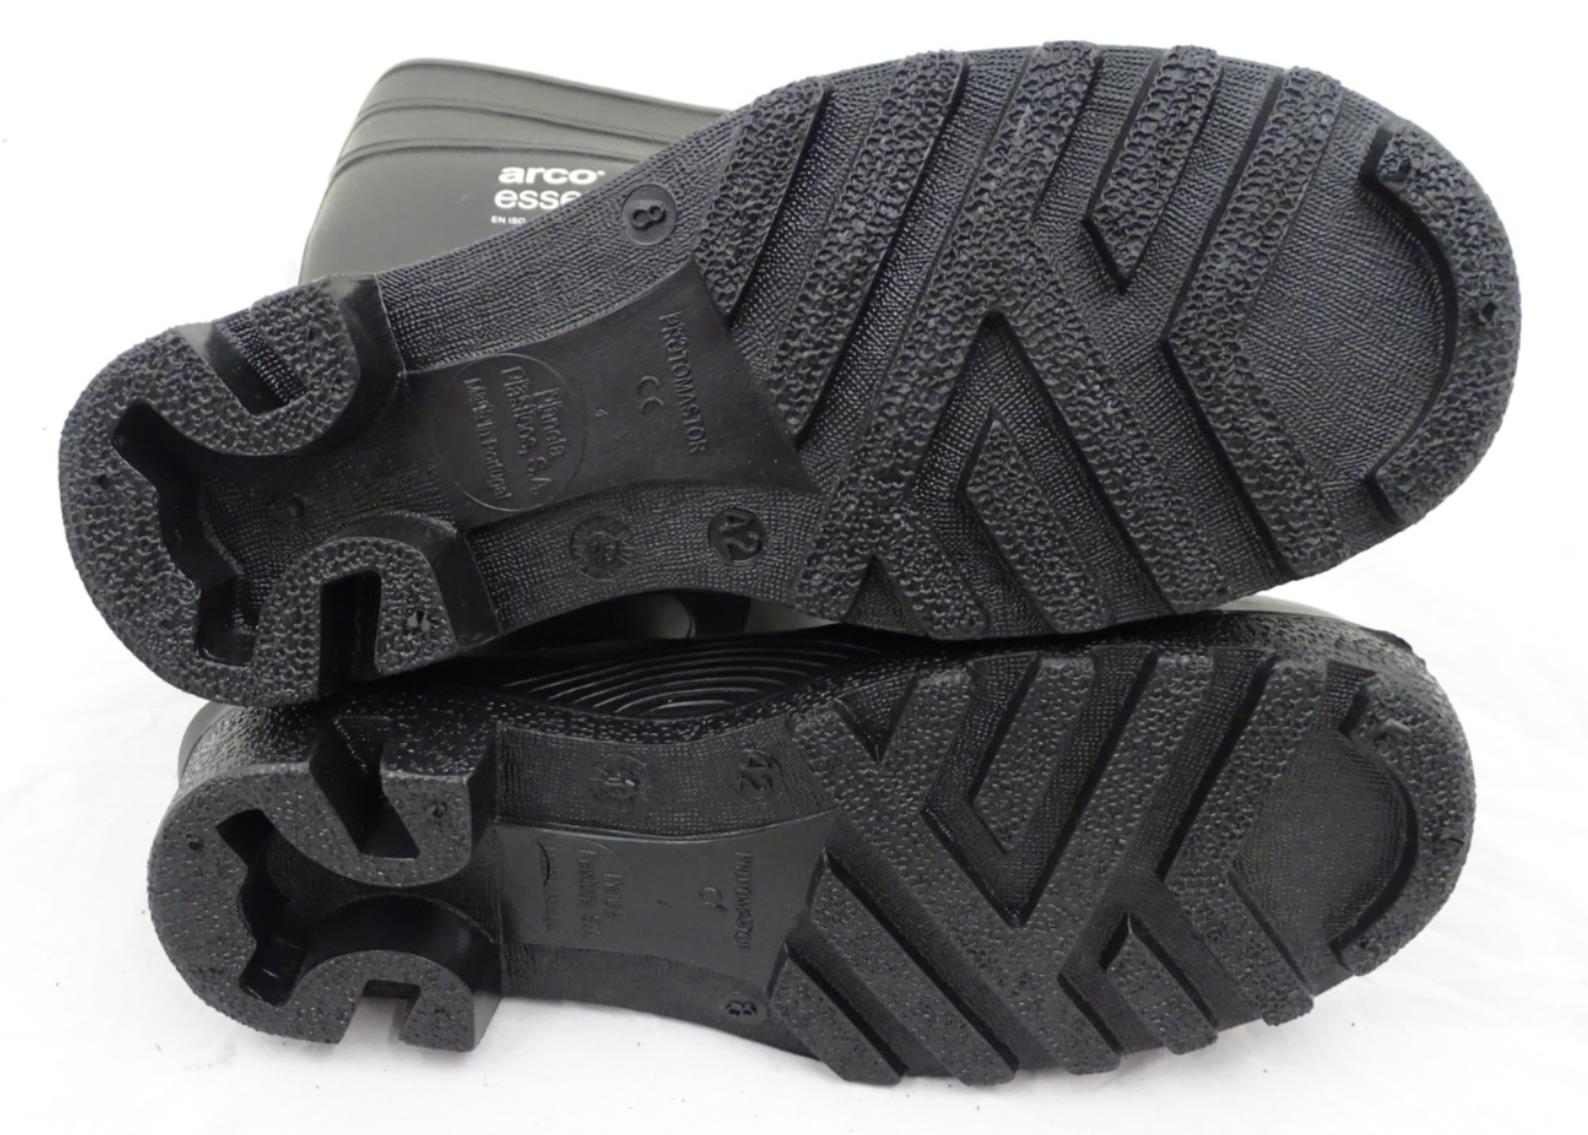 arco essentials safety shoes